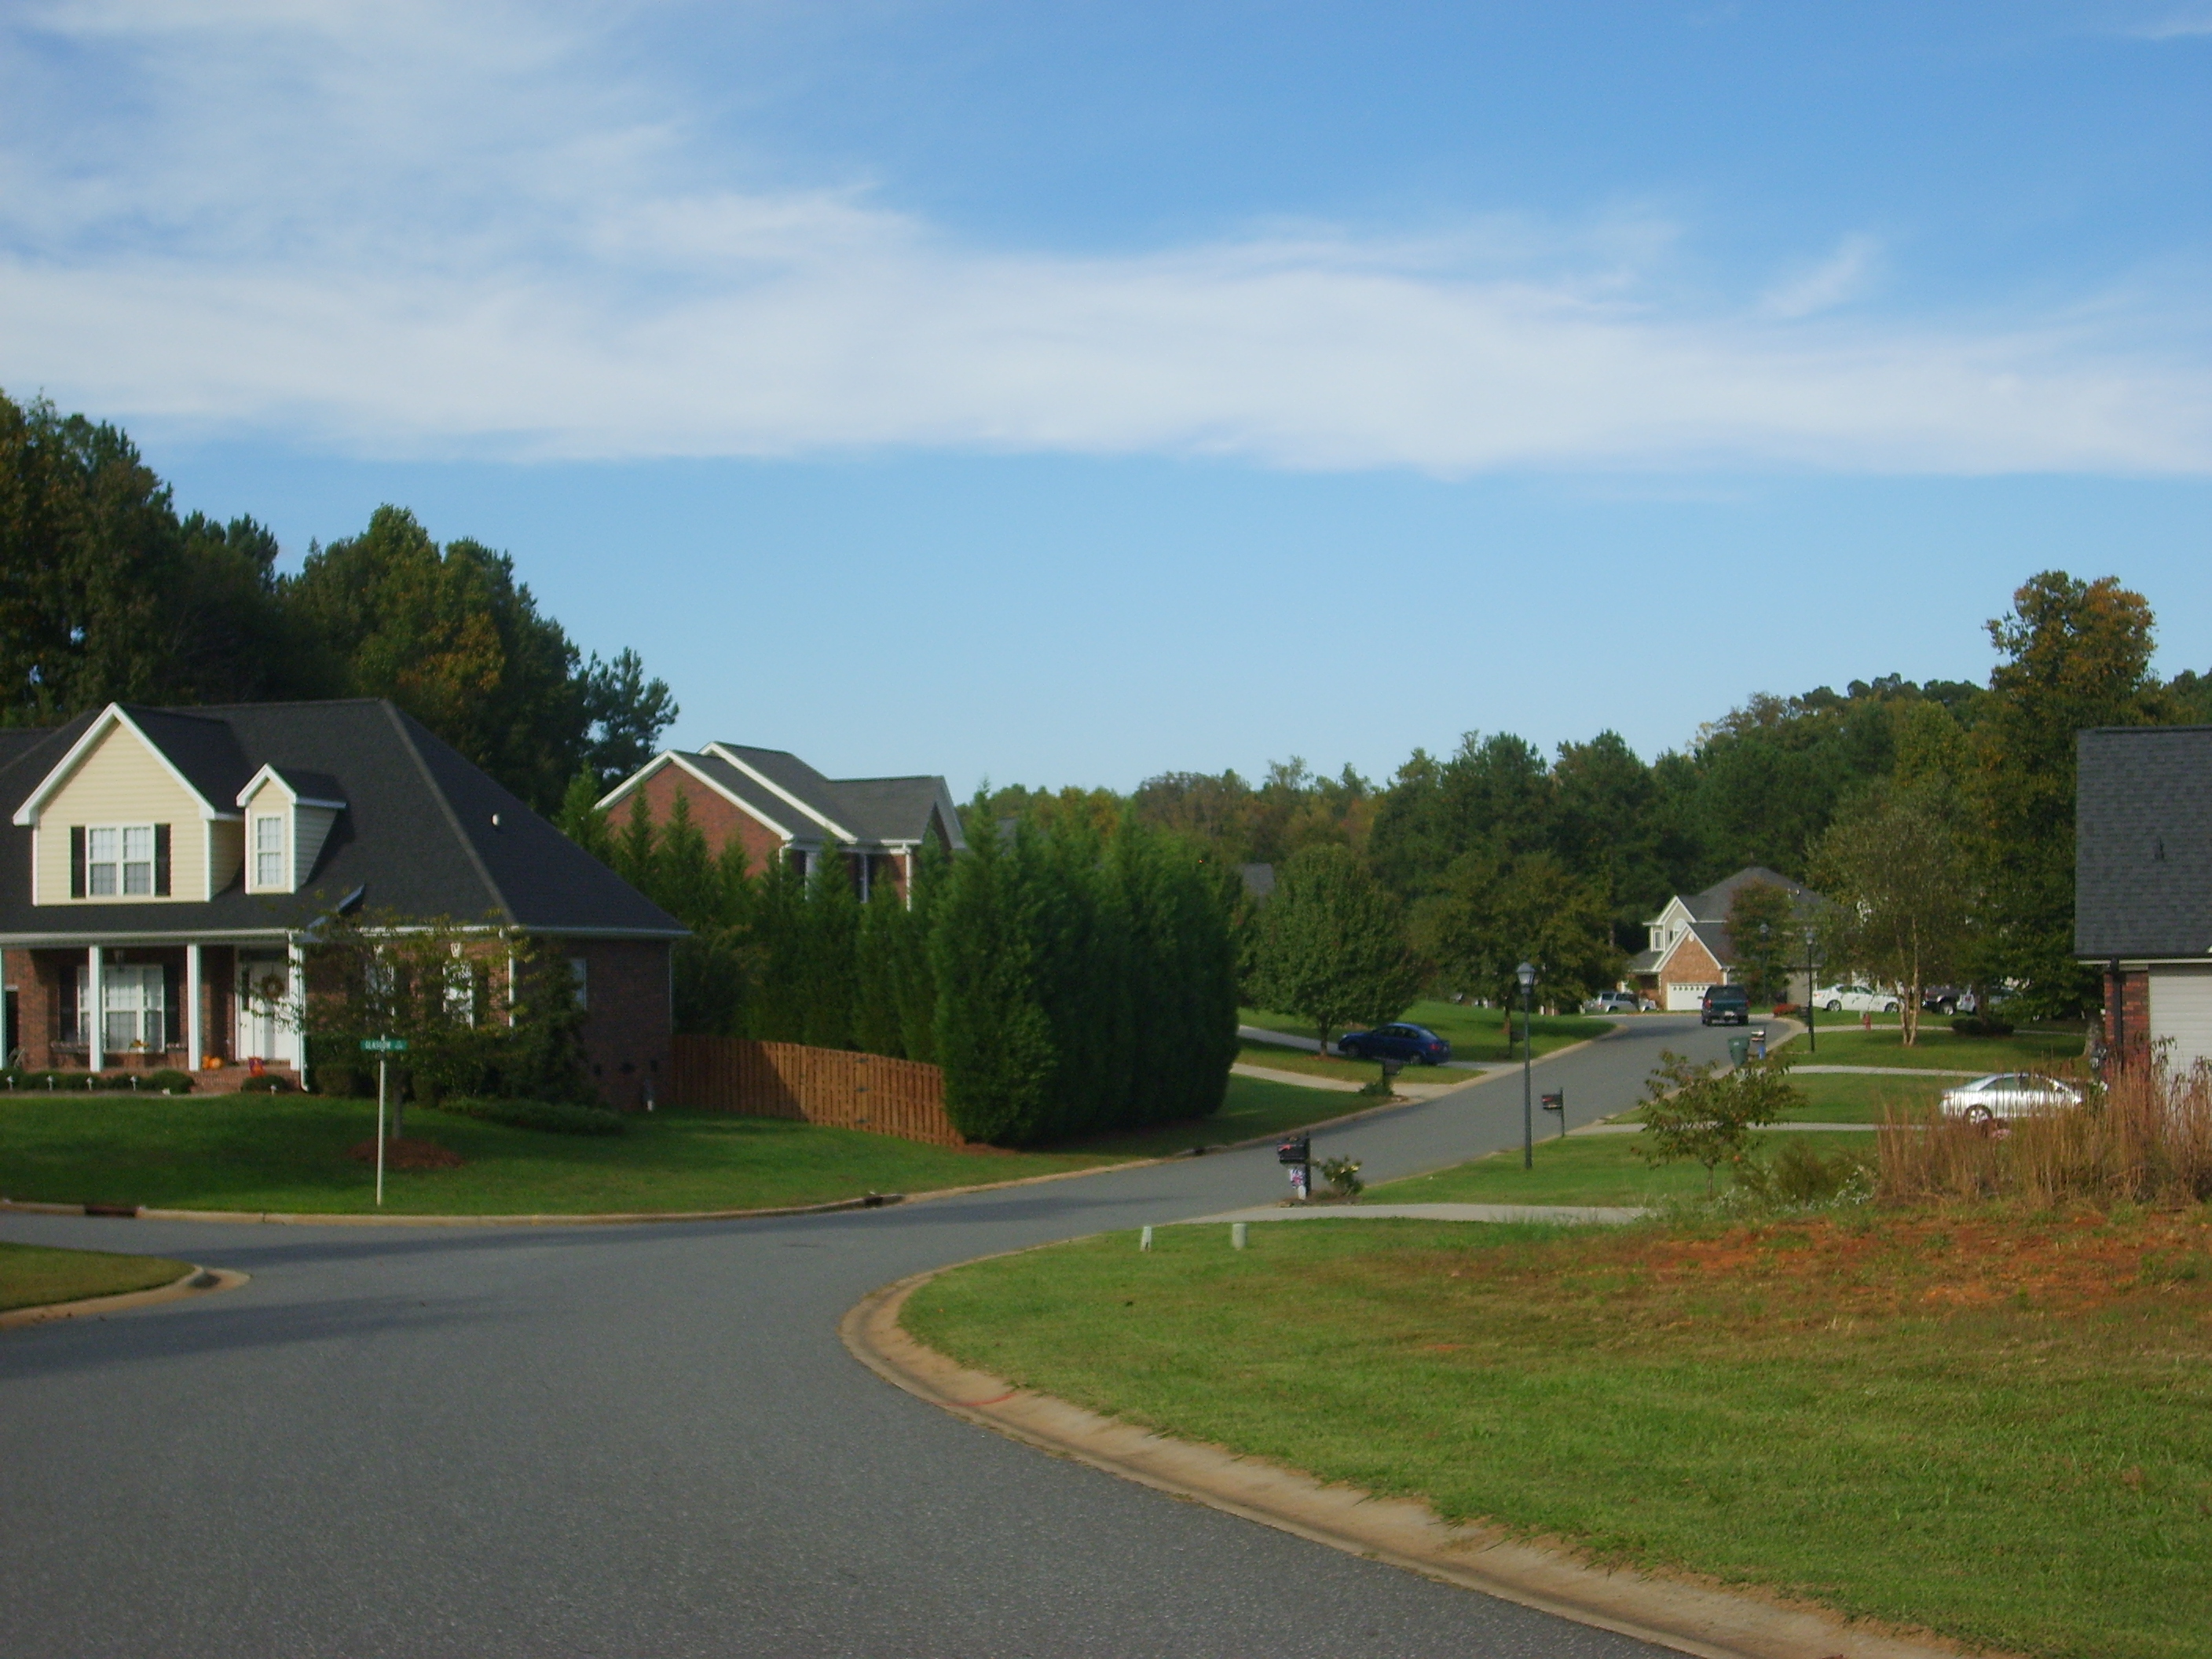 Cambridge Estates in Gastonia is a great place to live!